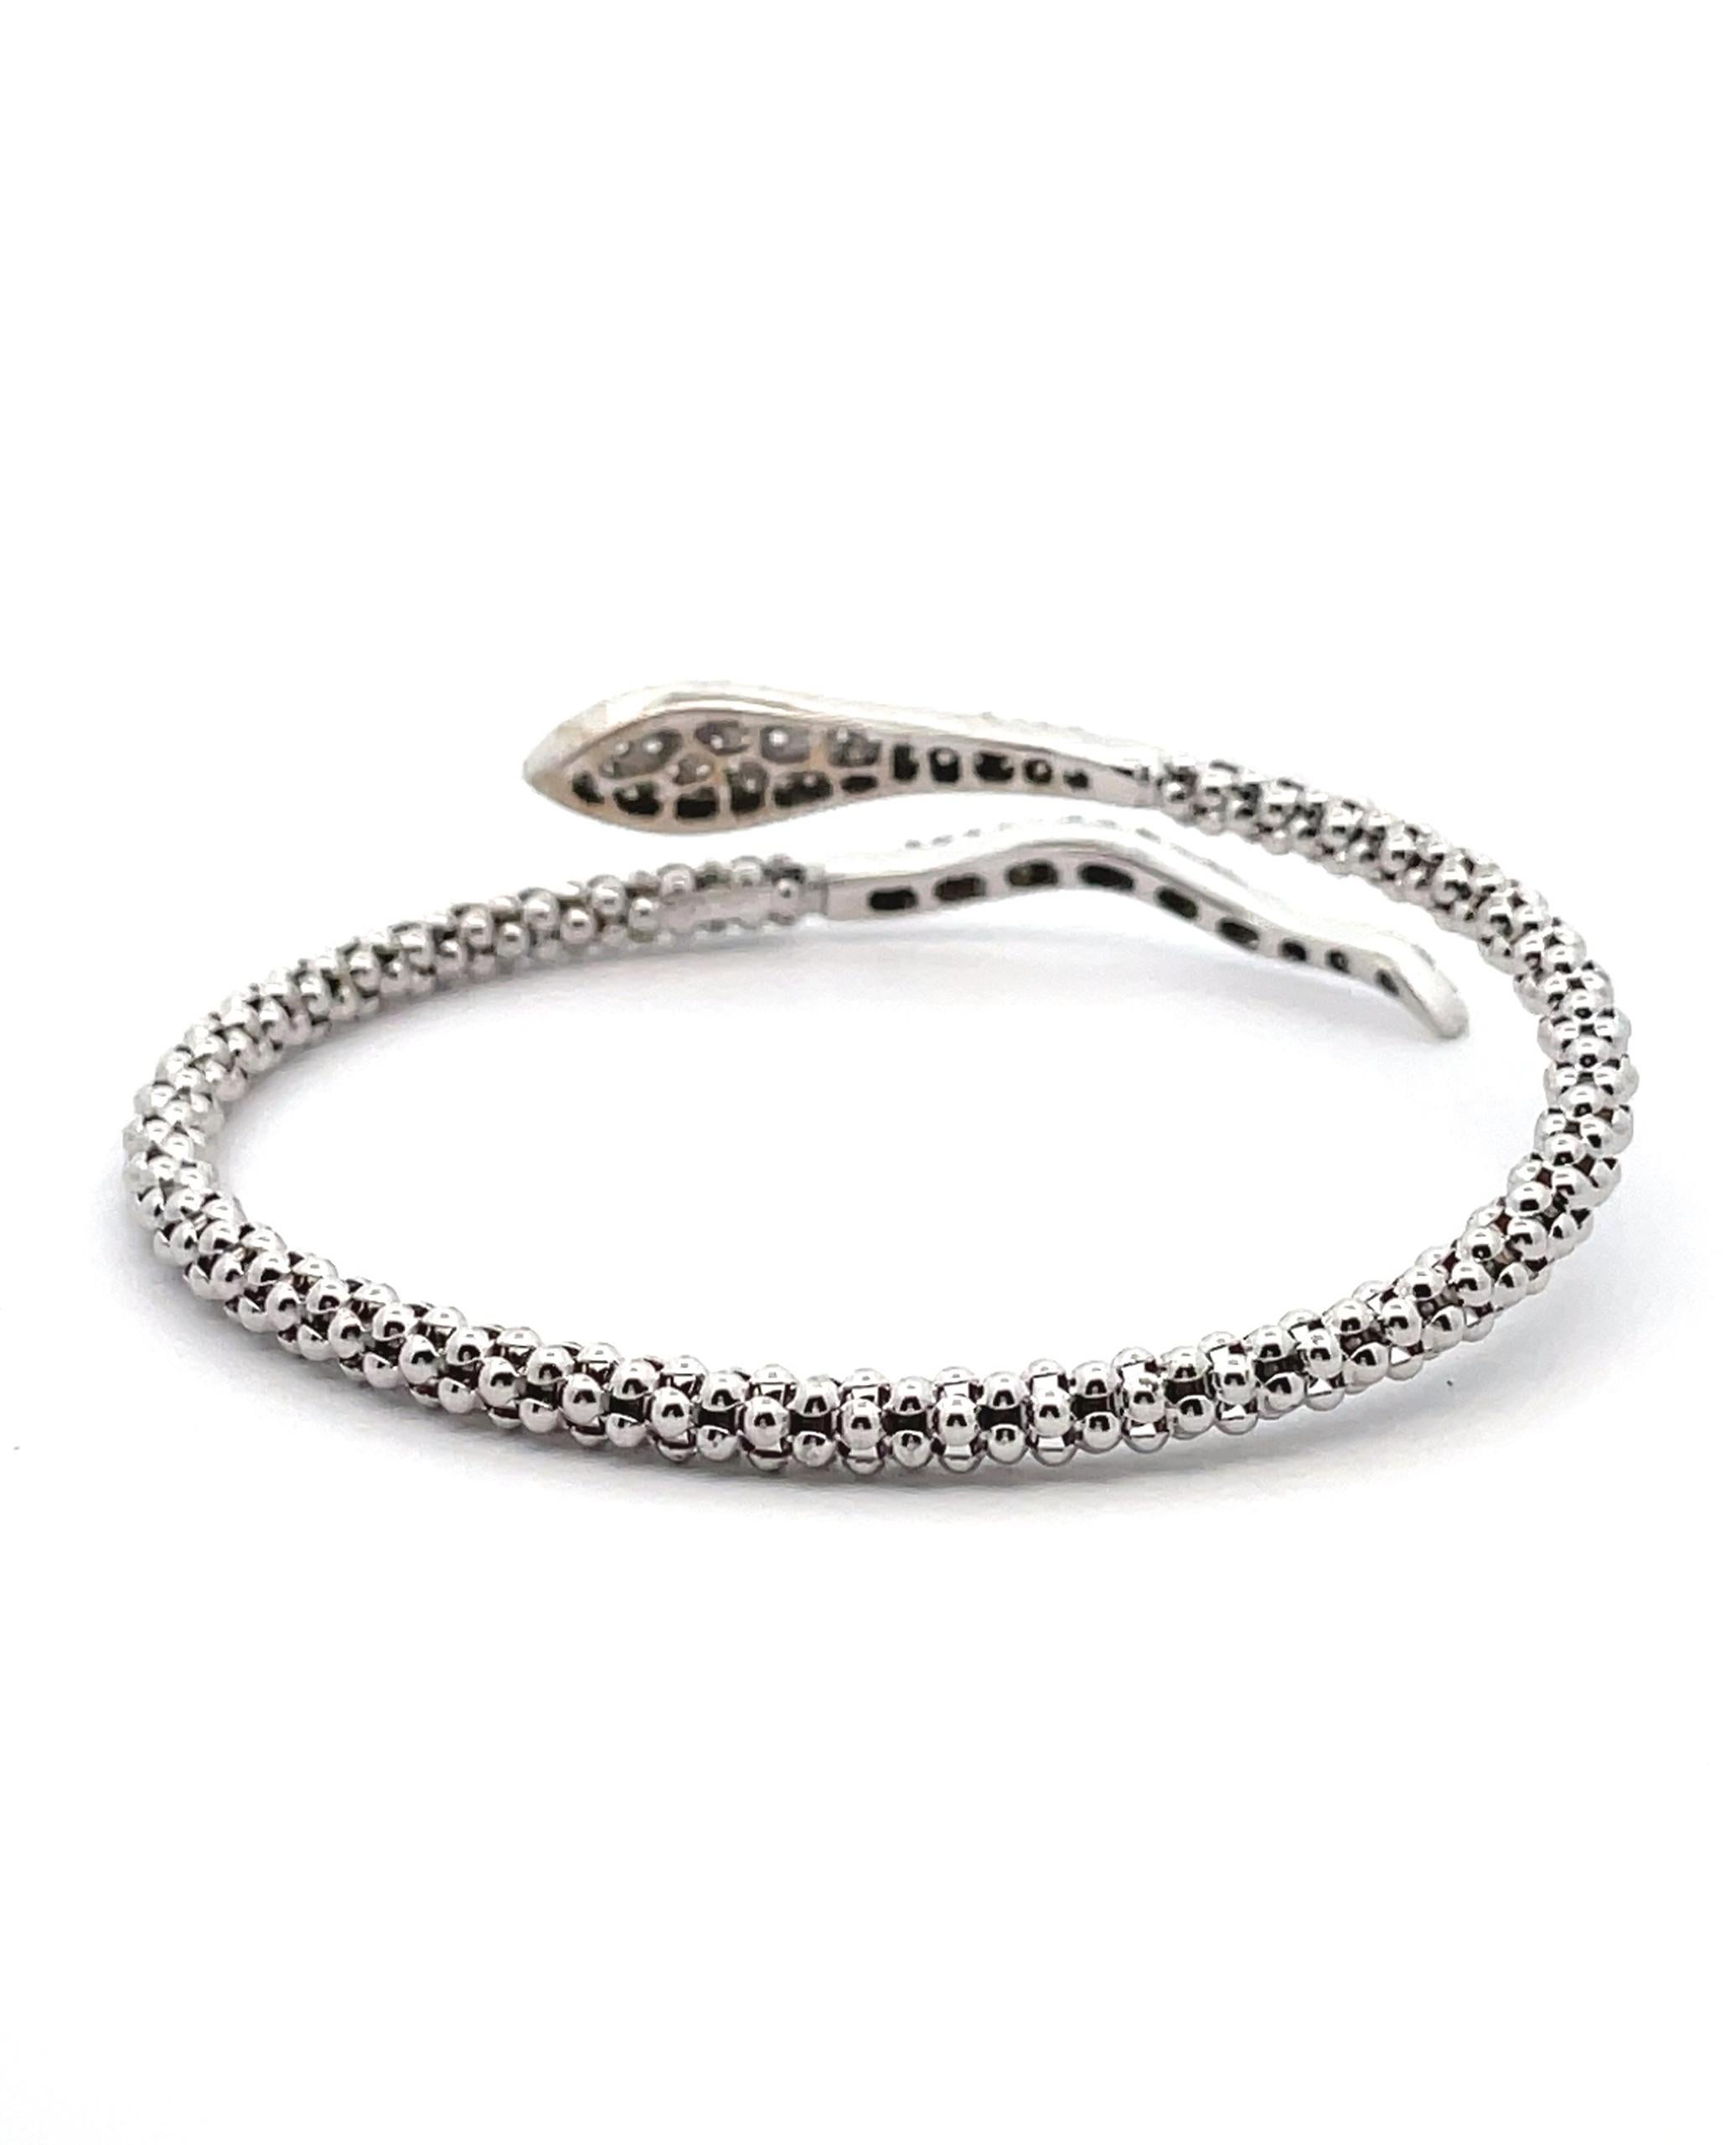 14K white gold snake wrap bracelet with 110 round brilliant-cut pavee set diamonds weighing 0.90 carats total.

* Diamonds are G/H color, SI clarity
* Bracelet is semi flexible